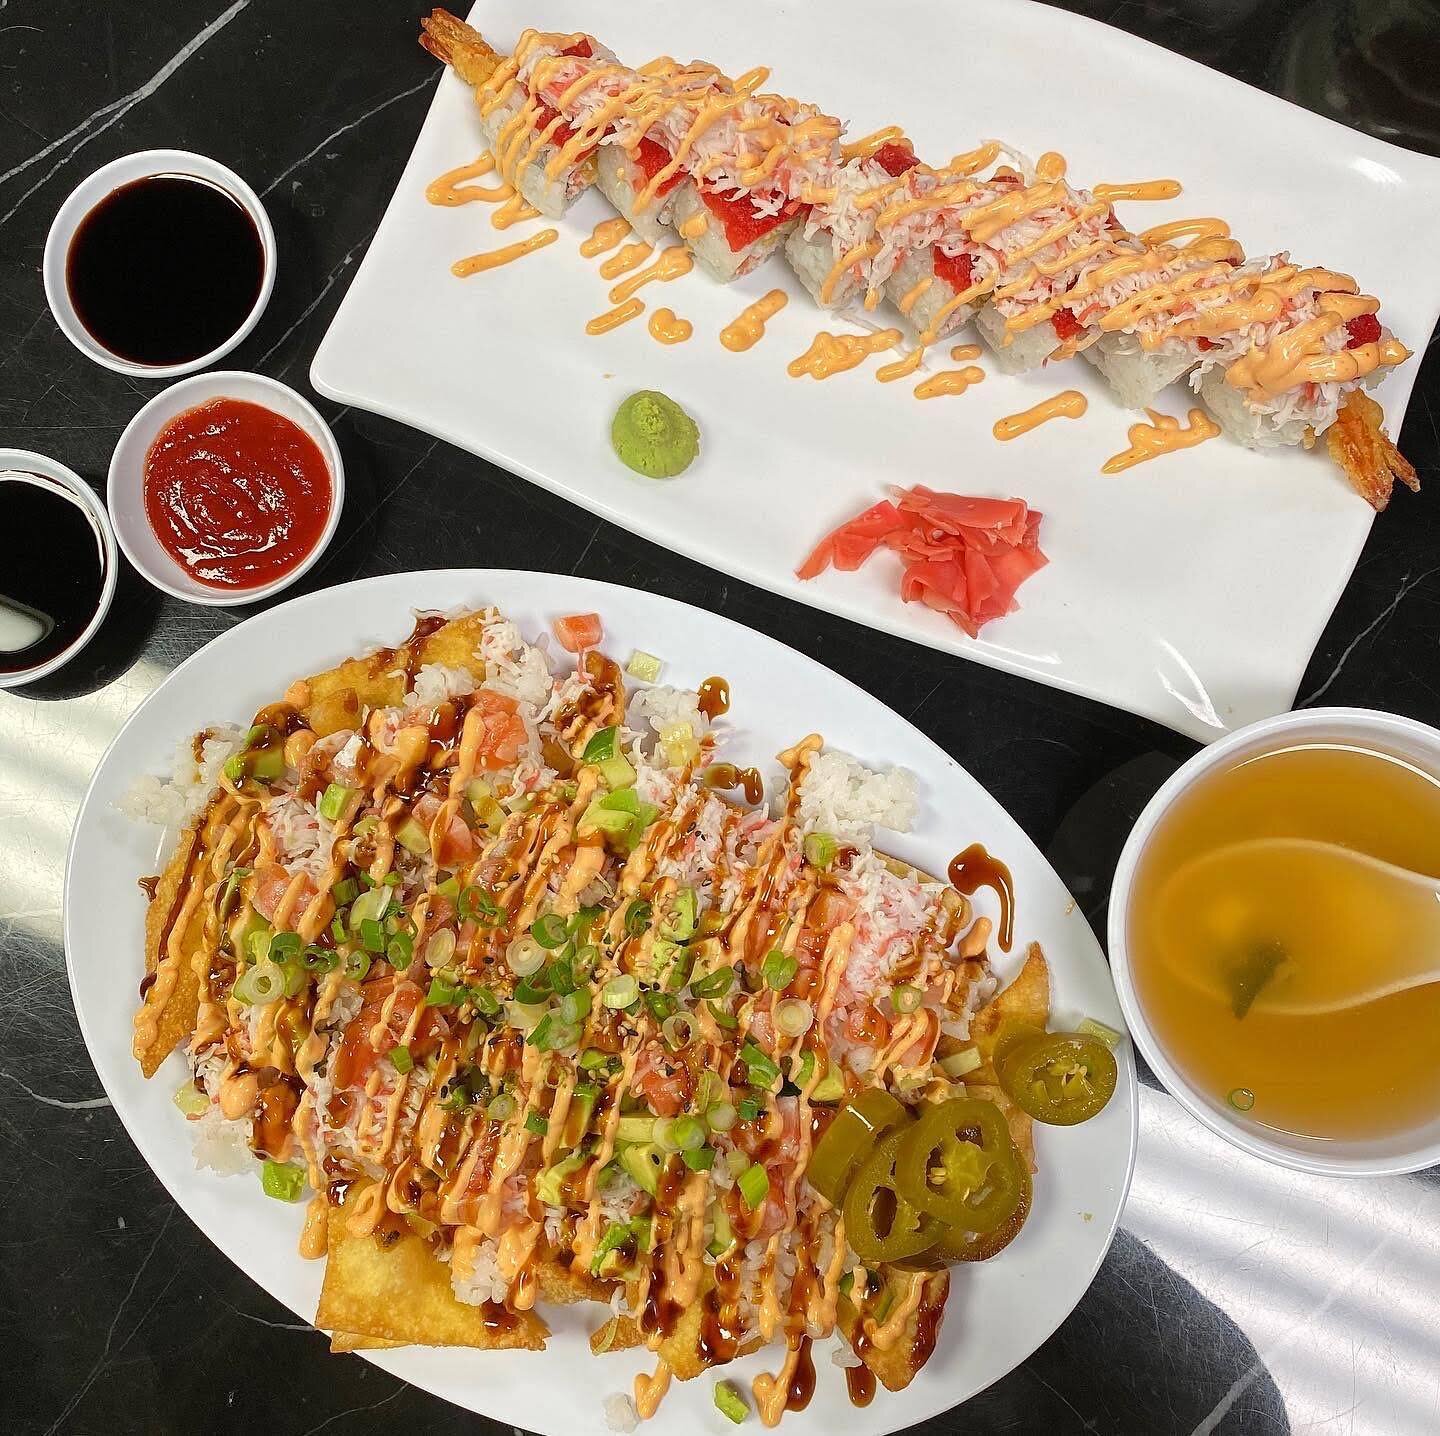 We have a Sushi Obsession 😍😋
Who else?! 🙌

📸: @rach.eatsrn 
🍣: @sushiobsessionvallejo 

#visitvallejo #vallejoca #cityofvallejo #vallejoeats #vallejofood #sushiobsessionvallejo #sushiobsession #supportlocal #sushinachos